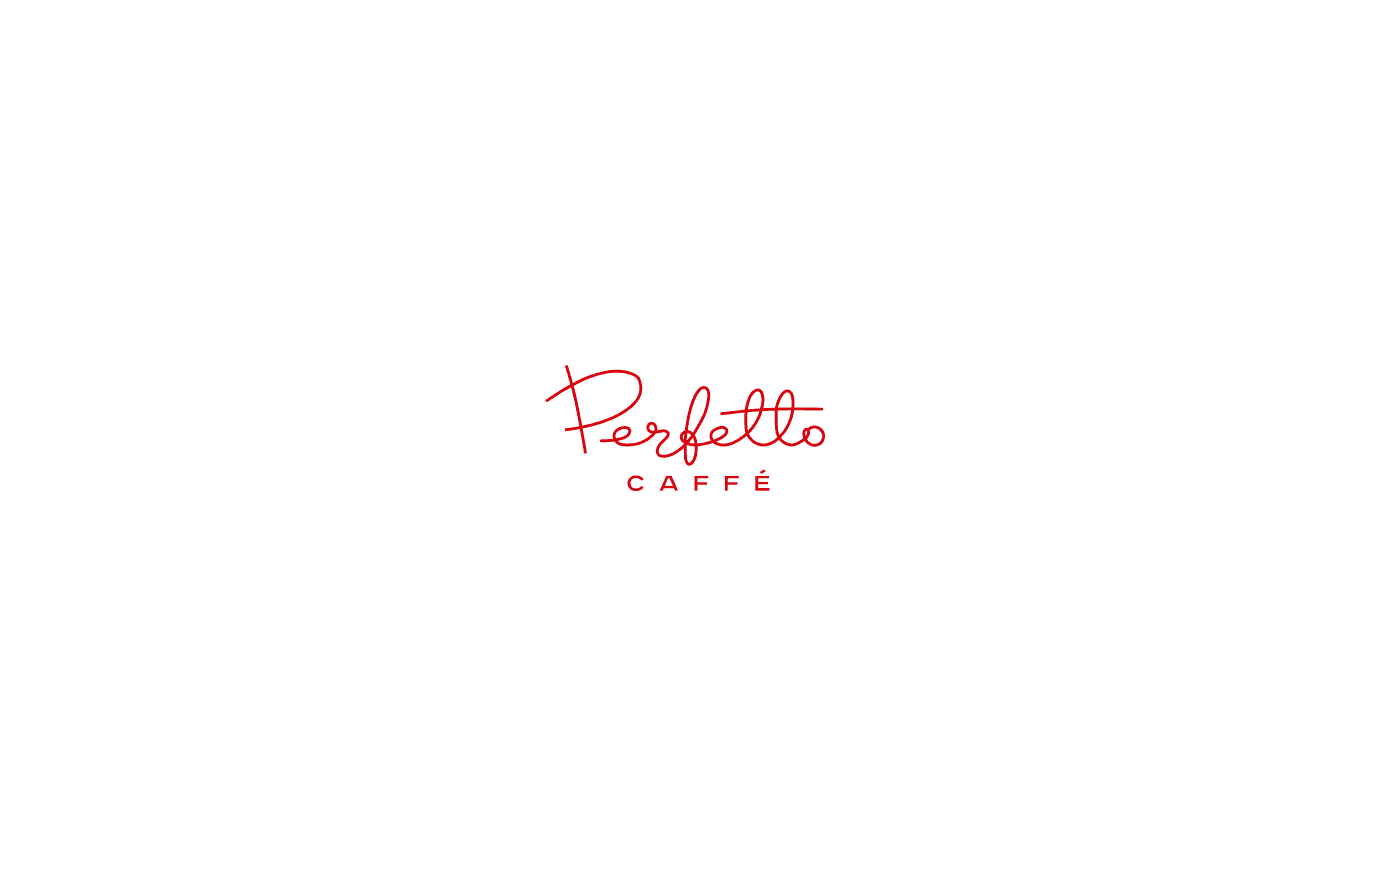 Perfetto Caffe on Behance